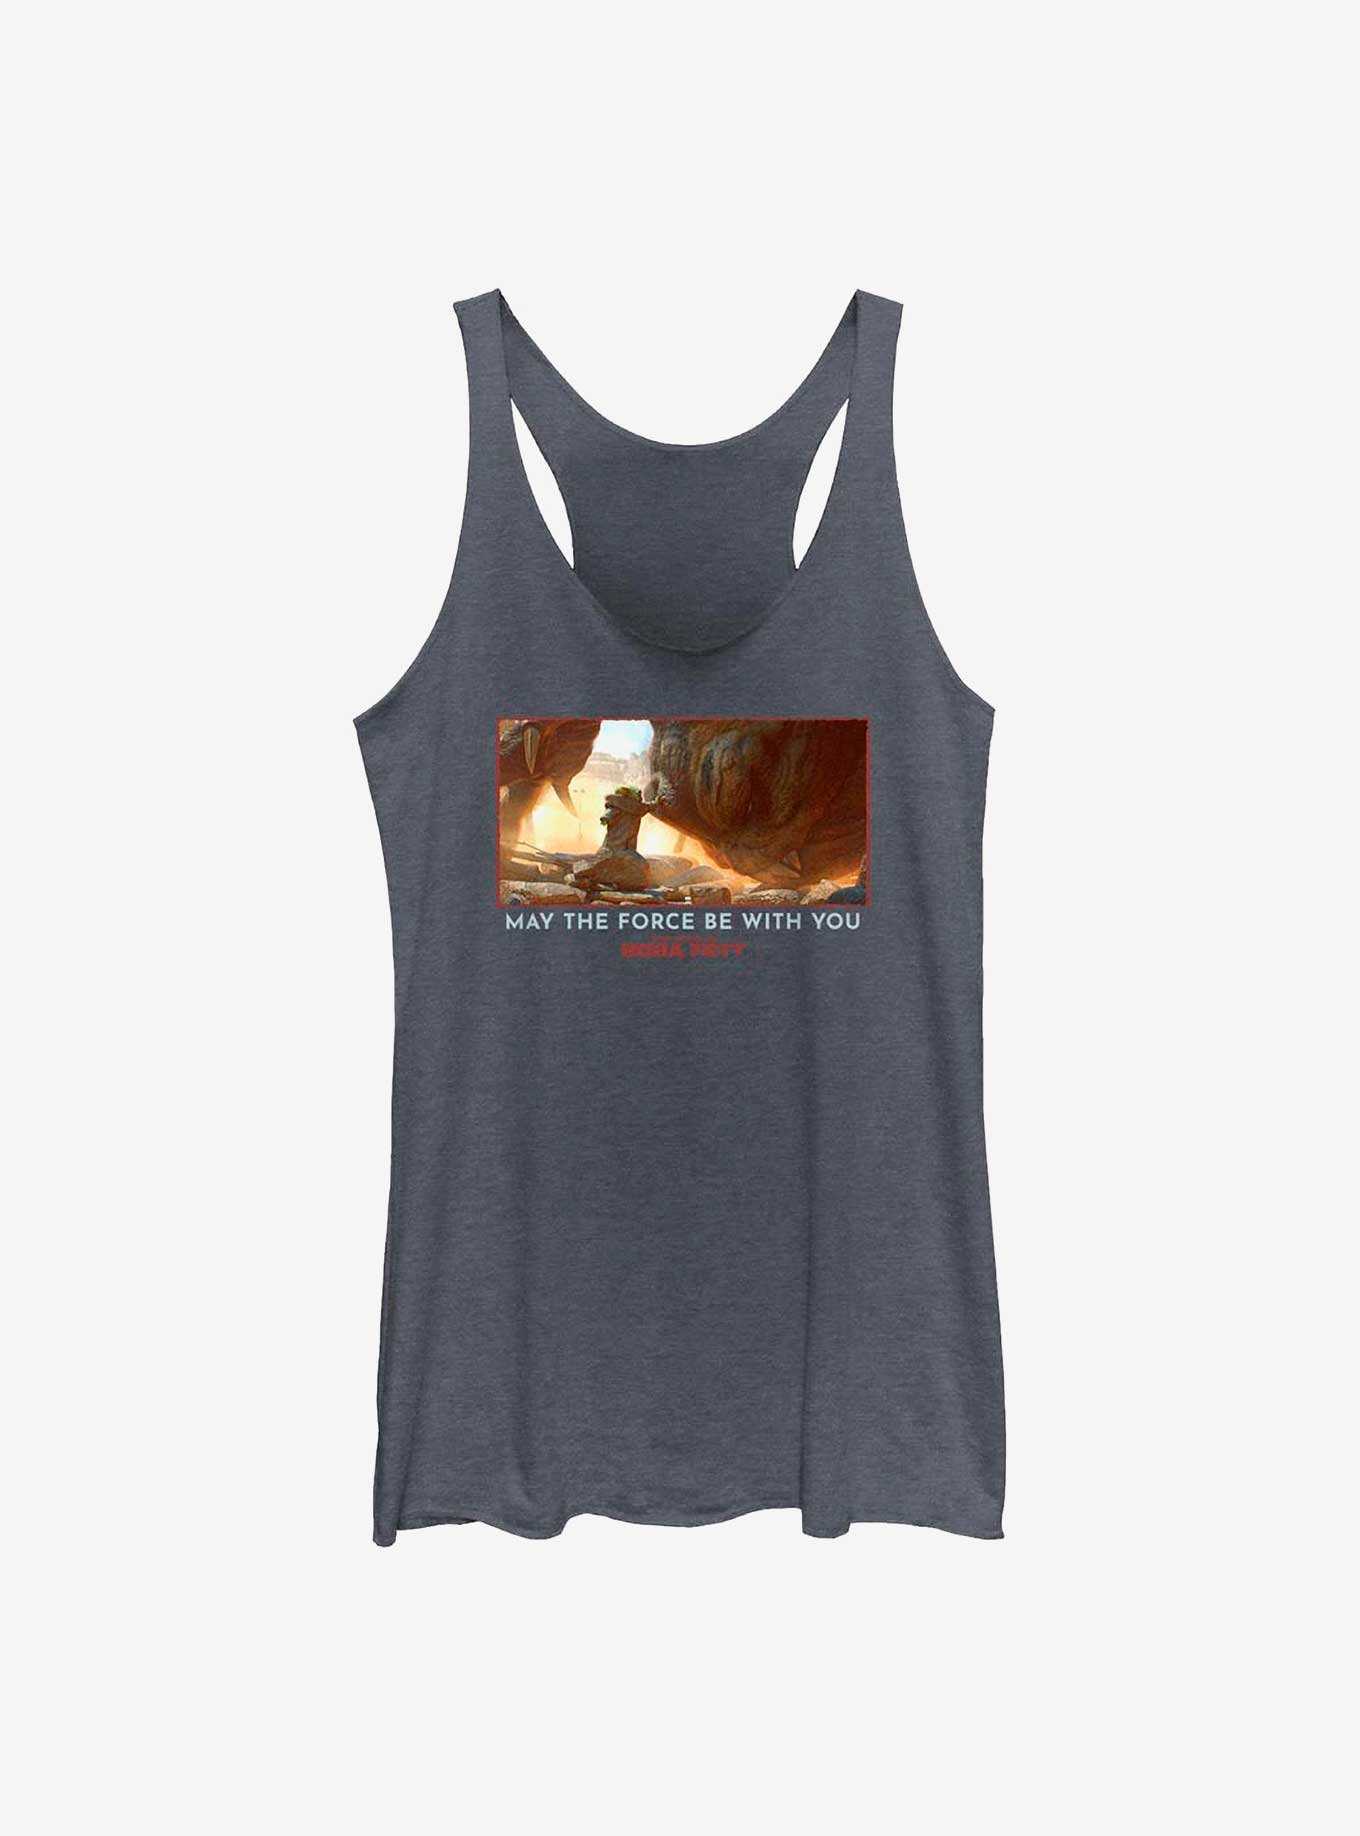 Star Wars The Book Of Boba Fett The Child Never Give Up Girls Tank Top, , hi-res